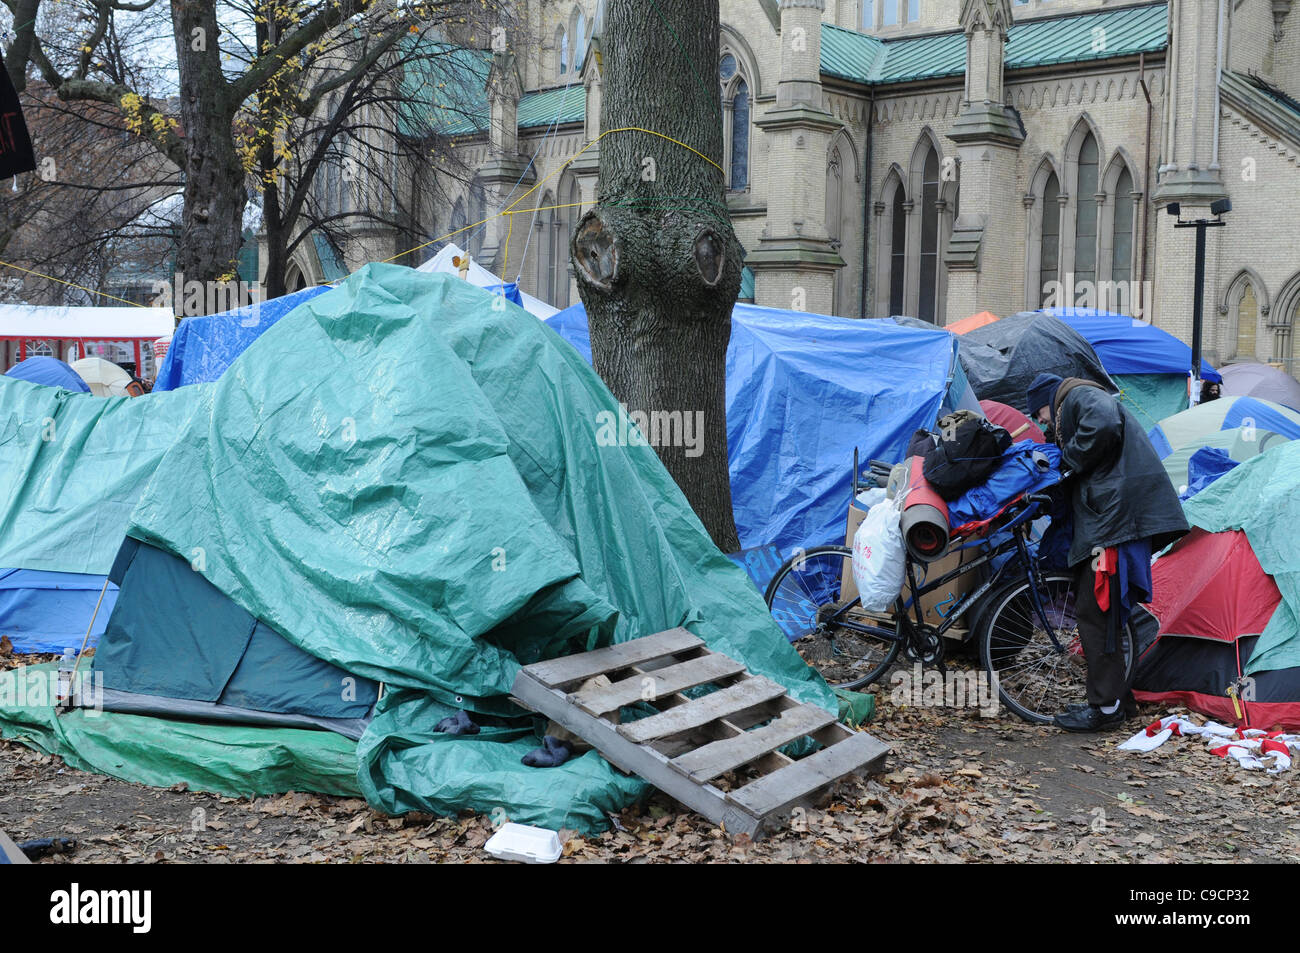 November 21, 2011, one protester packs up readying to vacate St. James park following the decision handed down this morning by Ontario Superior Court judge David Brown, upholding the Occupy Toronto tent camp eviction. Stock Photo